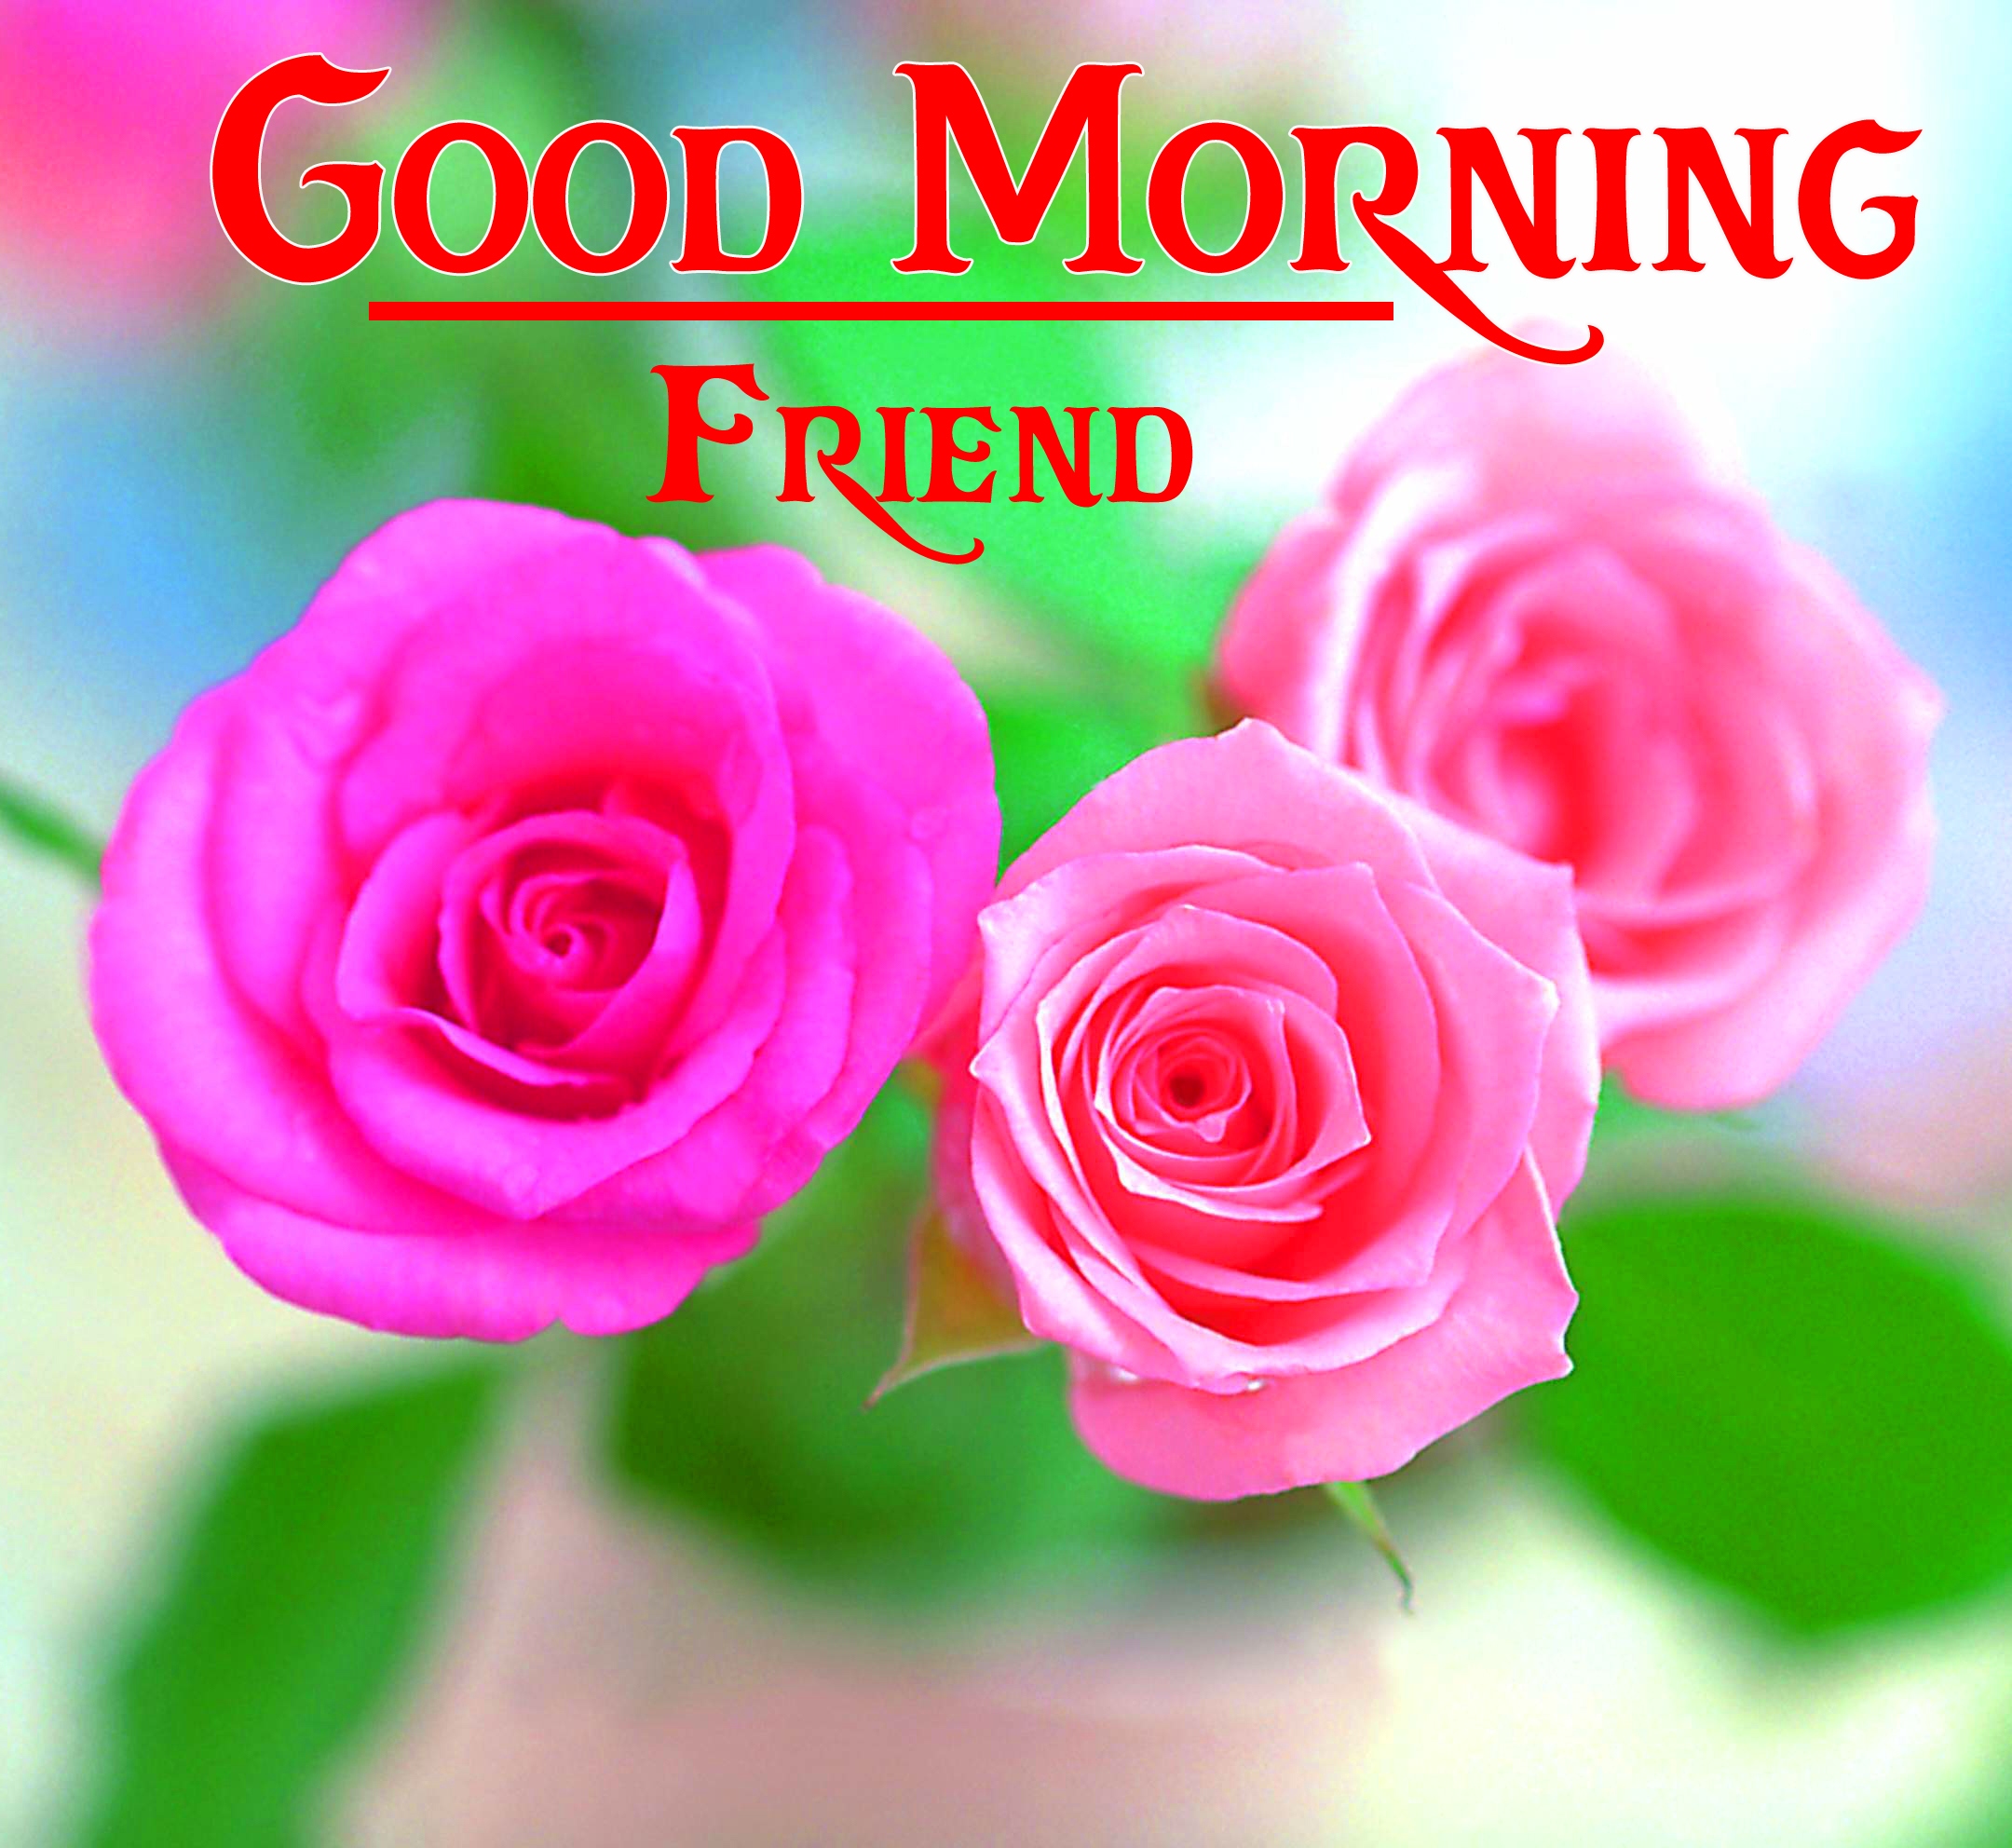 Good Morning Wishes For Her Wallpaper Download With Rose 